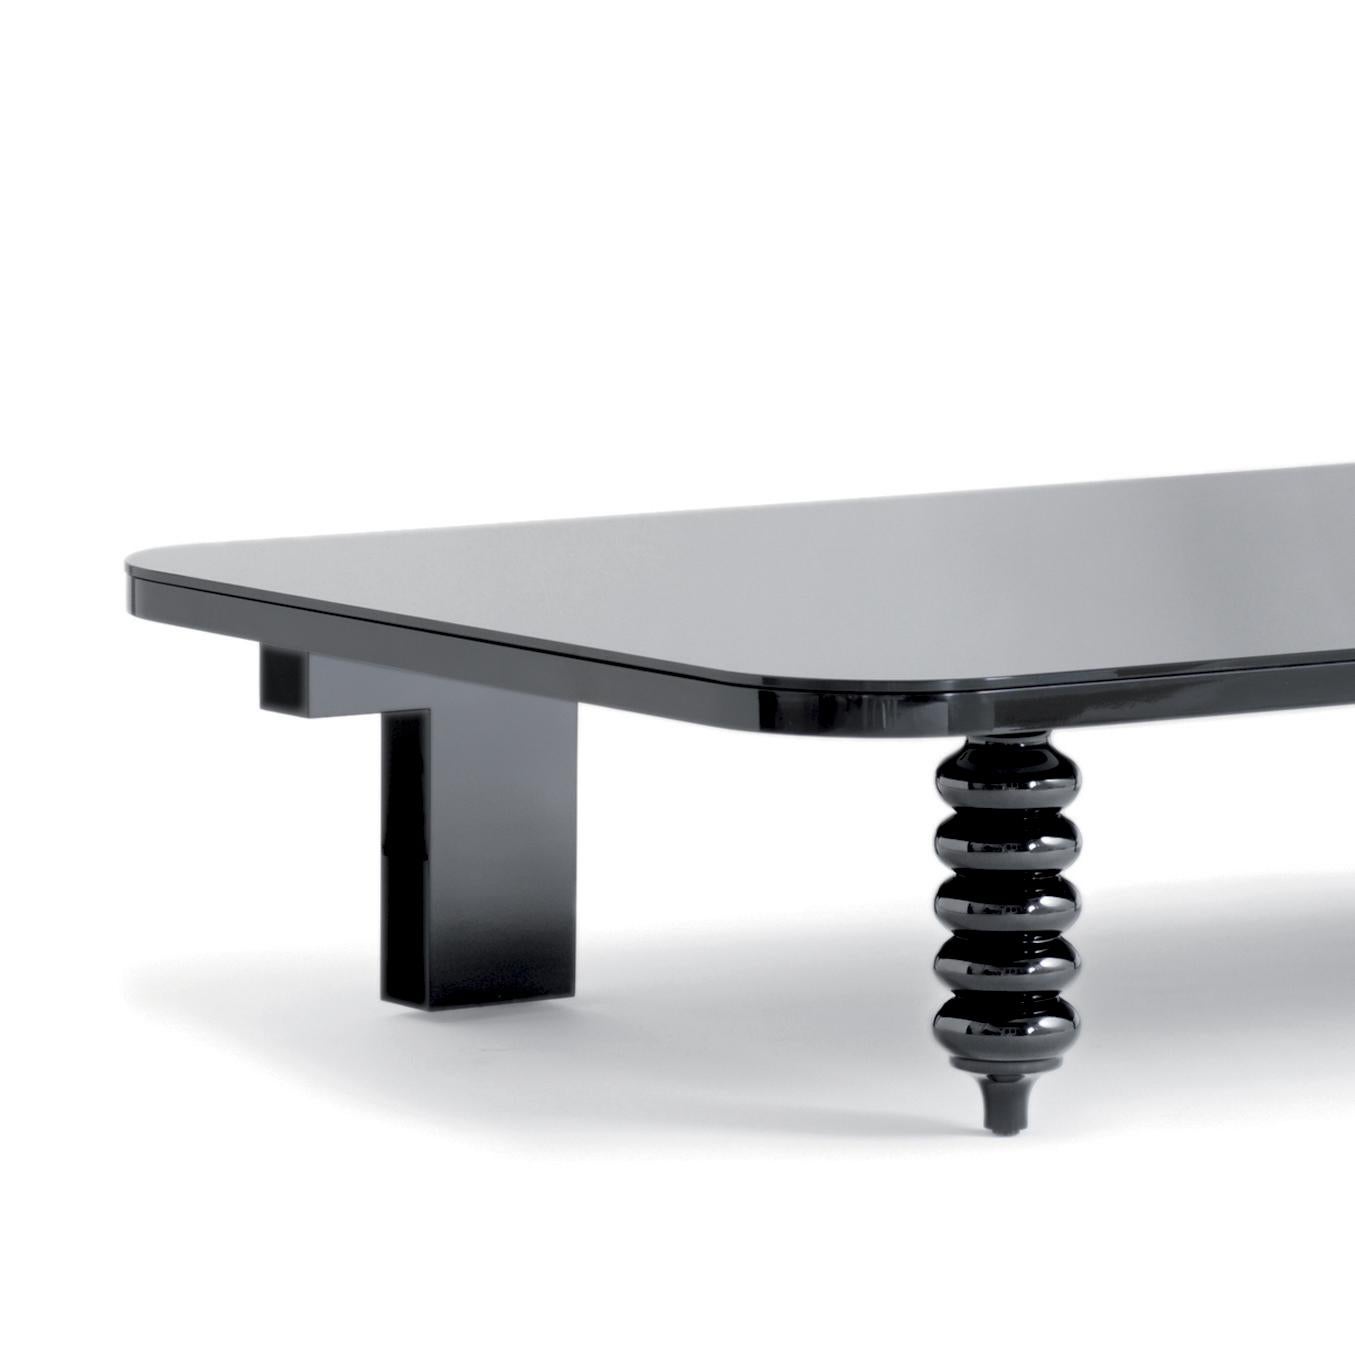 Low table designed by Jaime Hayon.
Manufactured by BD Barcelona Design.

MDF base and legs in turned solid alder wood, lacquered in black gloss 

Meaasures: 100 x 160 x 35 cm.